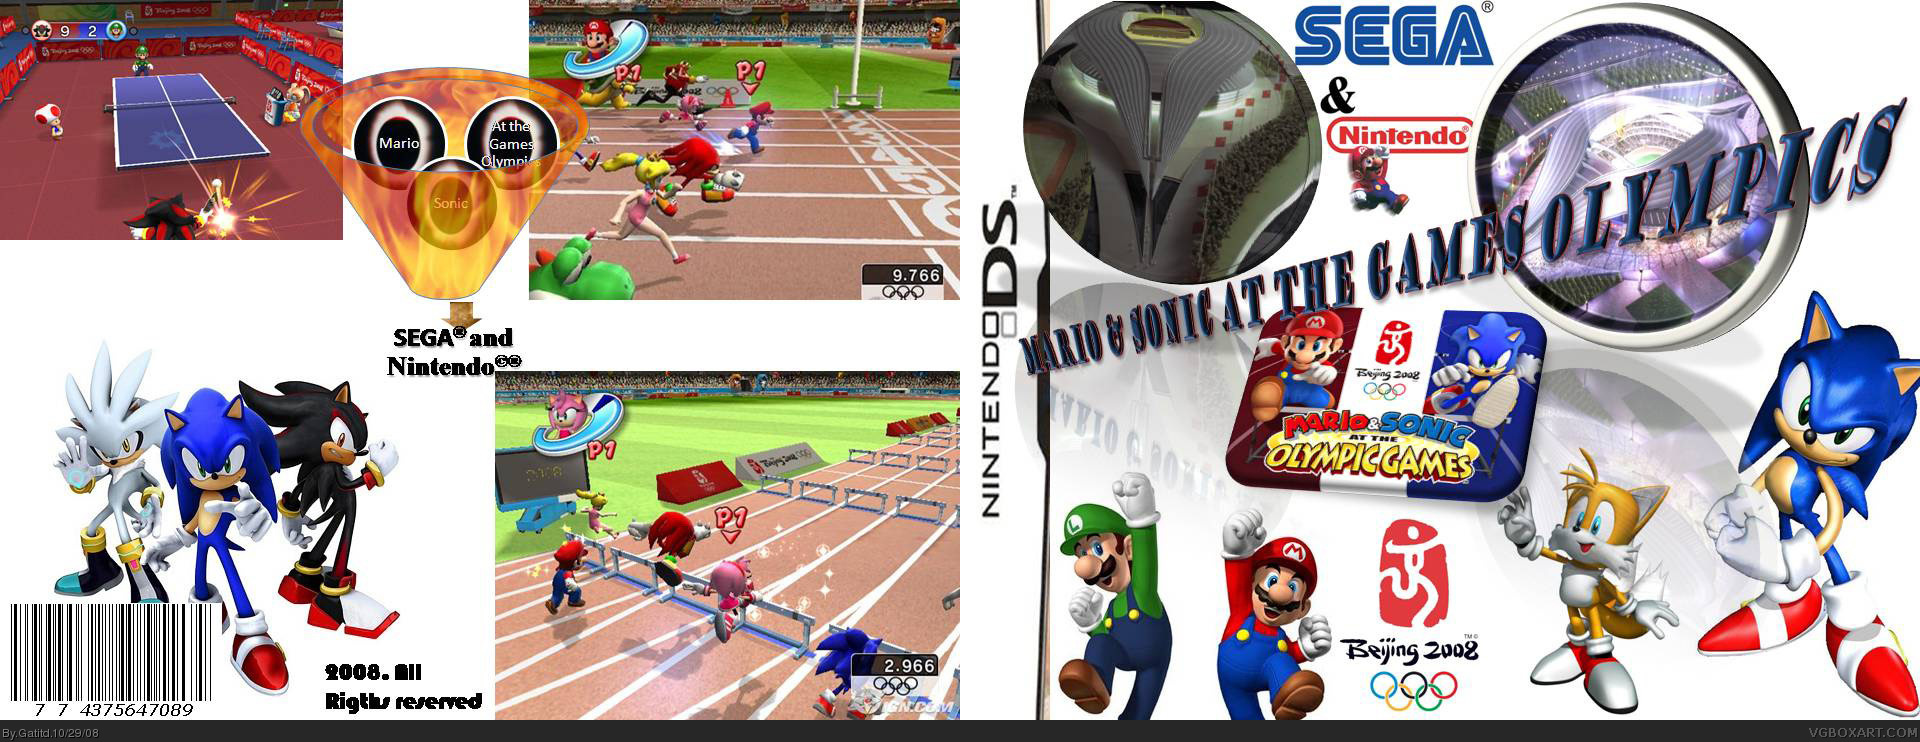 Mario & Sonic at the Olympics Games box cover